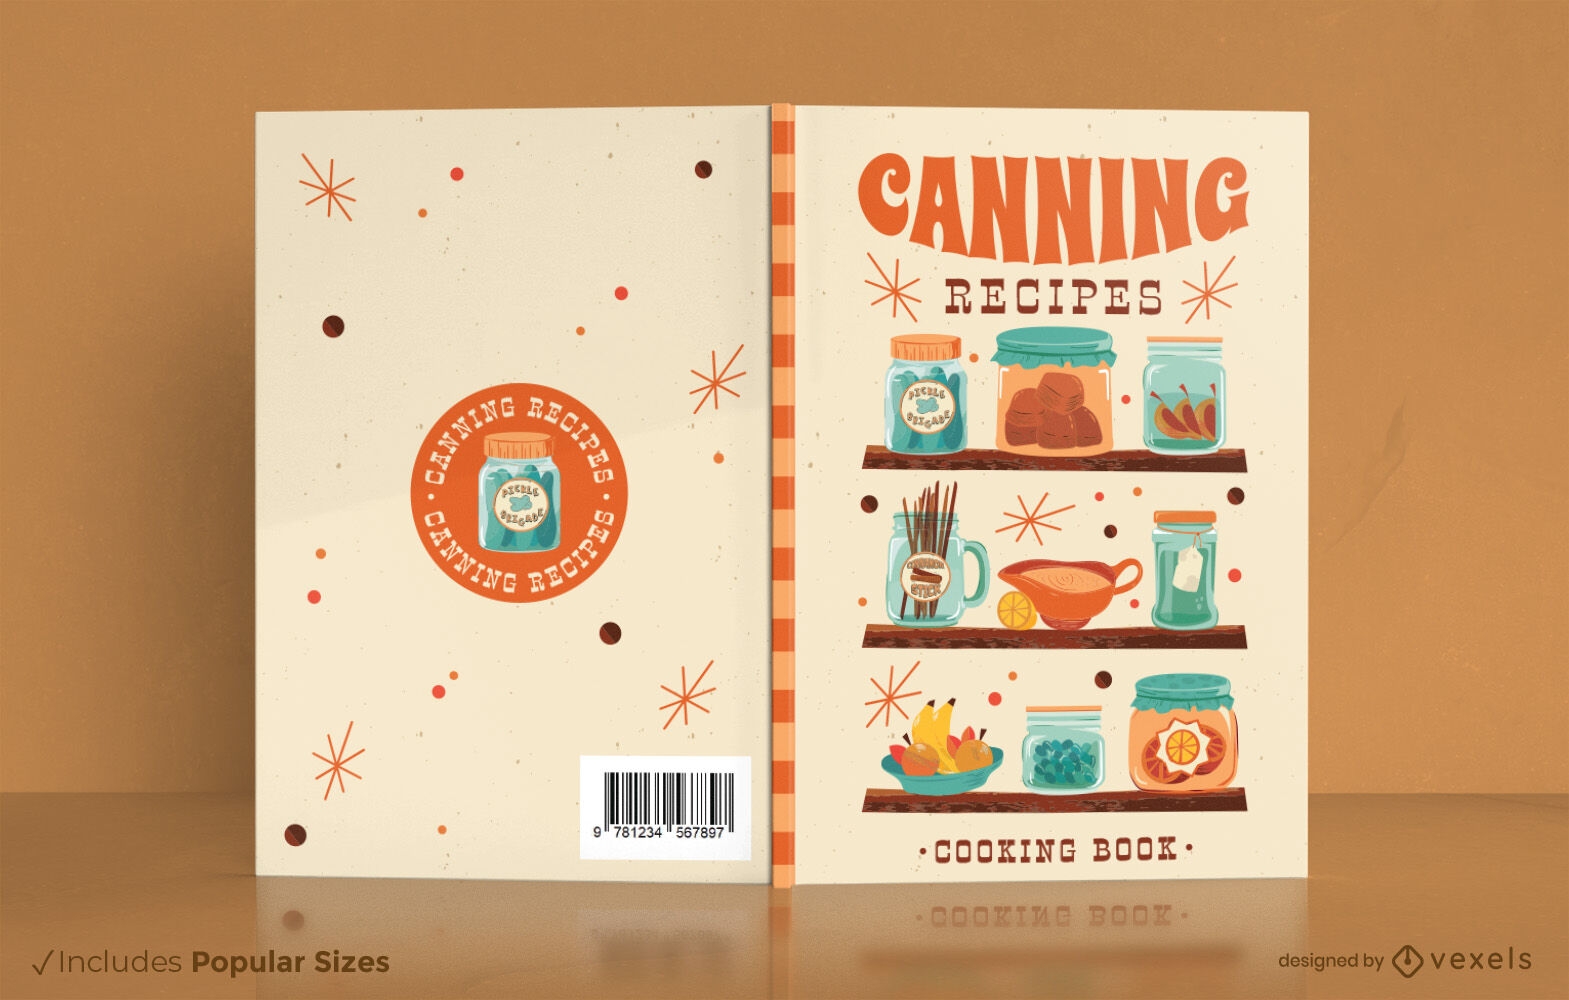 Canned food recipes book cover design